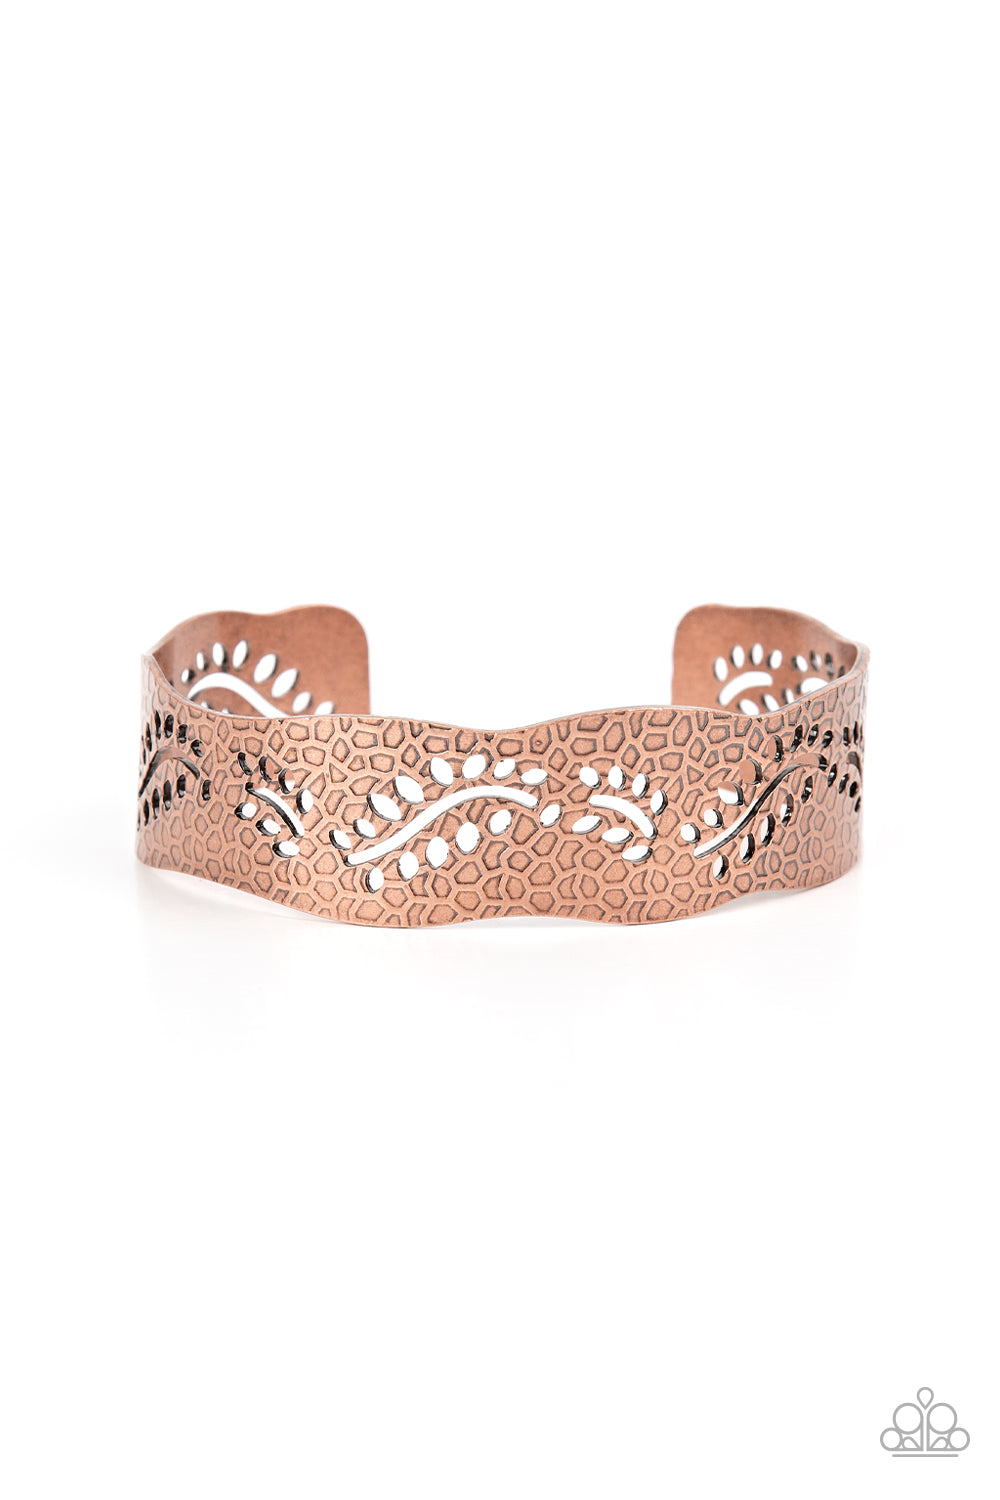 Savanna Oasis - Copper Item #P9BA-CPXX-073XX A wavy copper cuff is rustically embossed in an abstract honeycomb texture and stenciled in airy leafy patterns, resulting in a seasonal centerpiece around the wrist.  Sold as one individual bracelet.